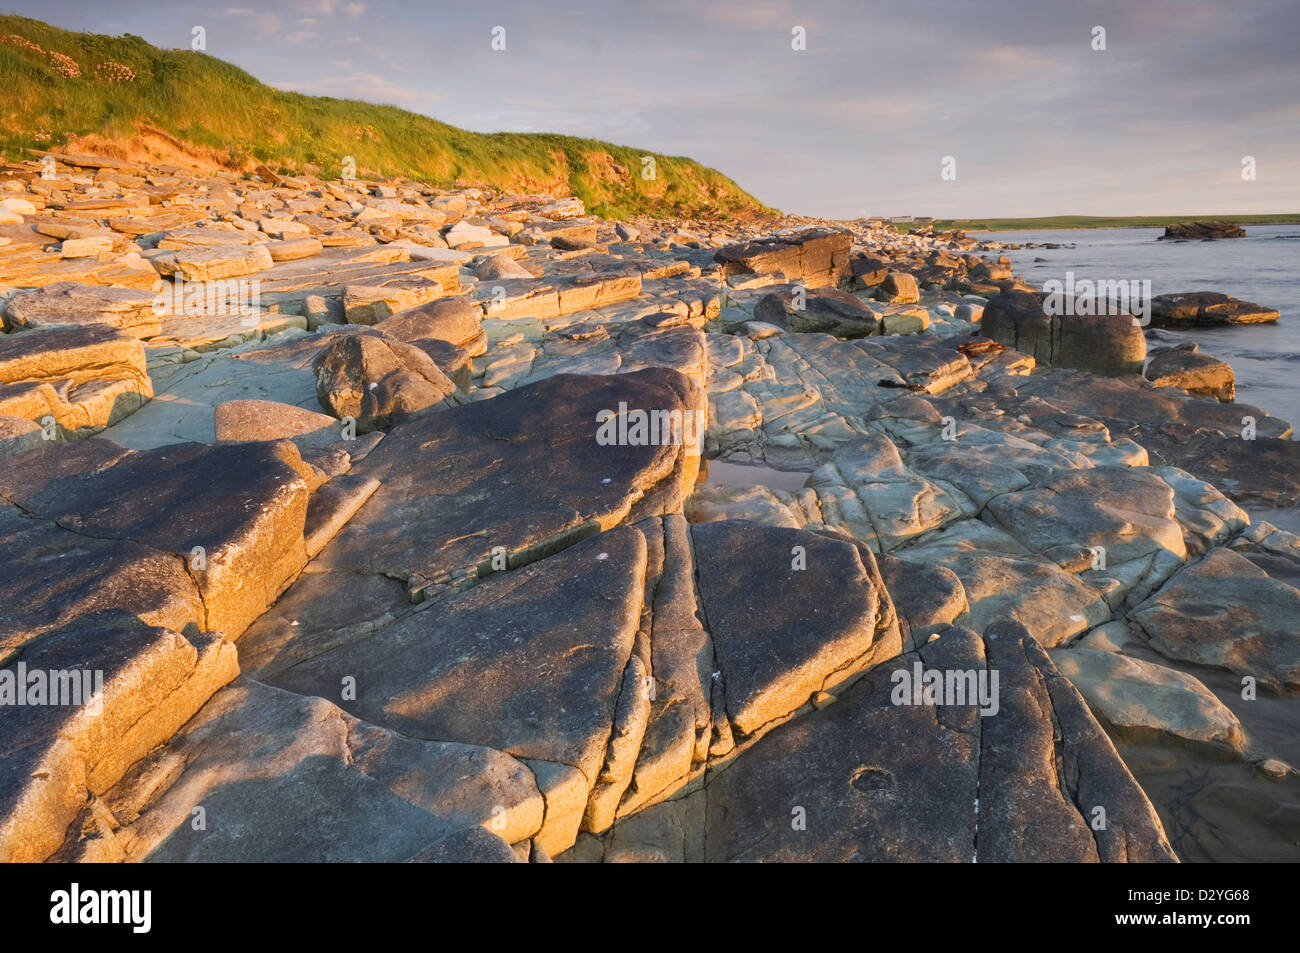 The coastline of the island of Shapinsay at sunset, Orkney Islands, Scotland. Stock Photo